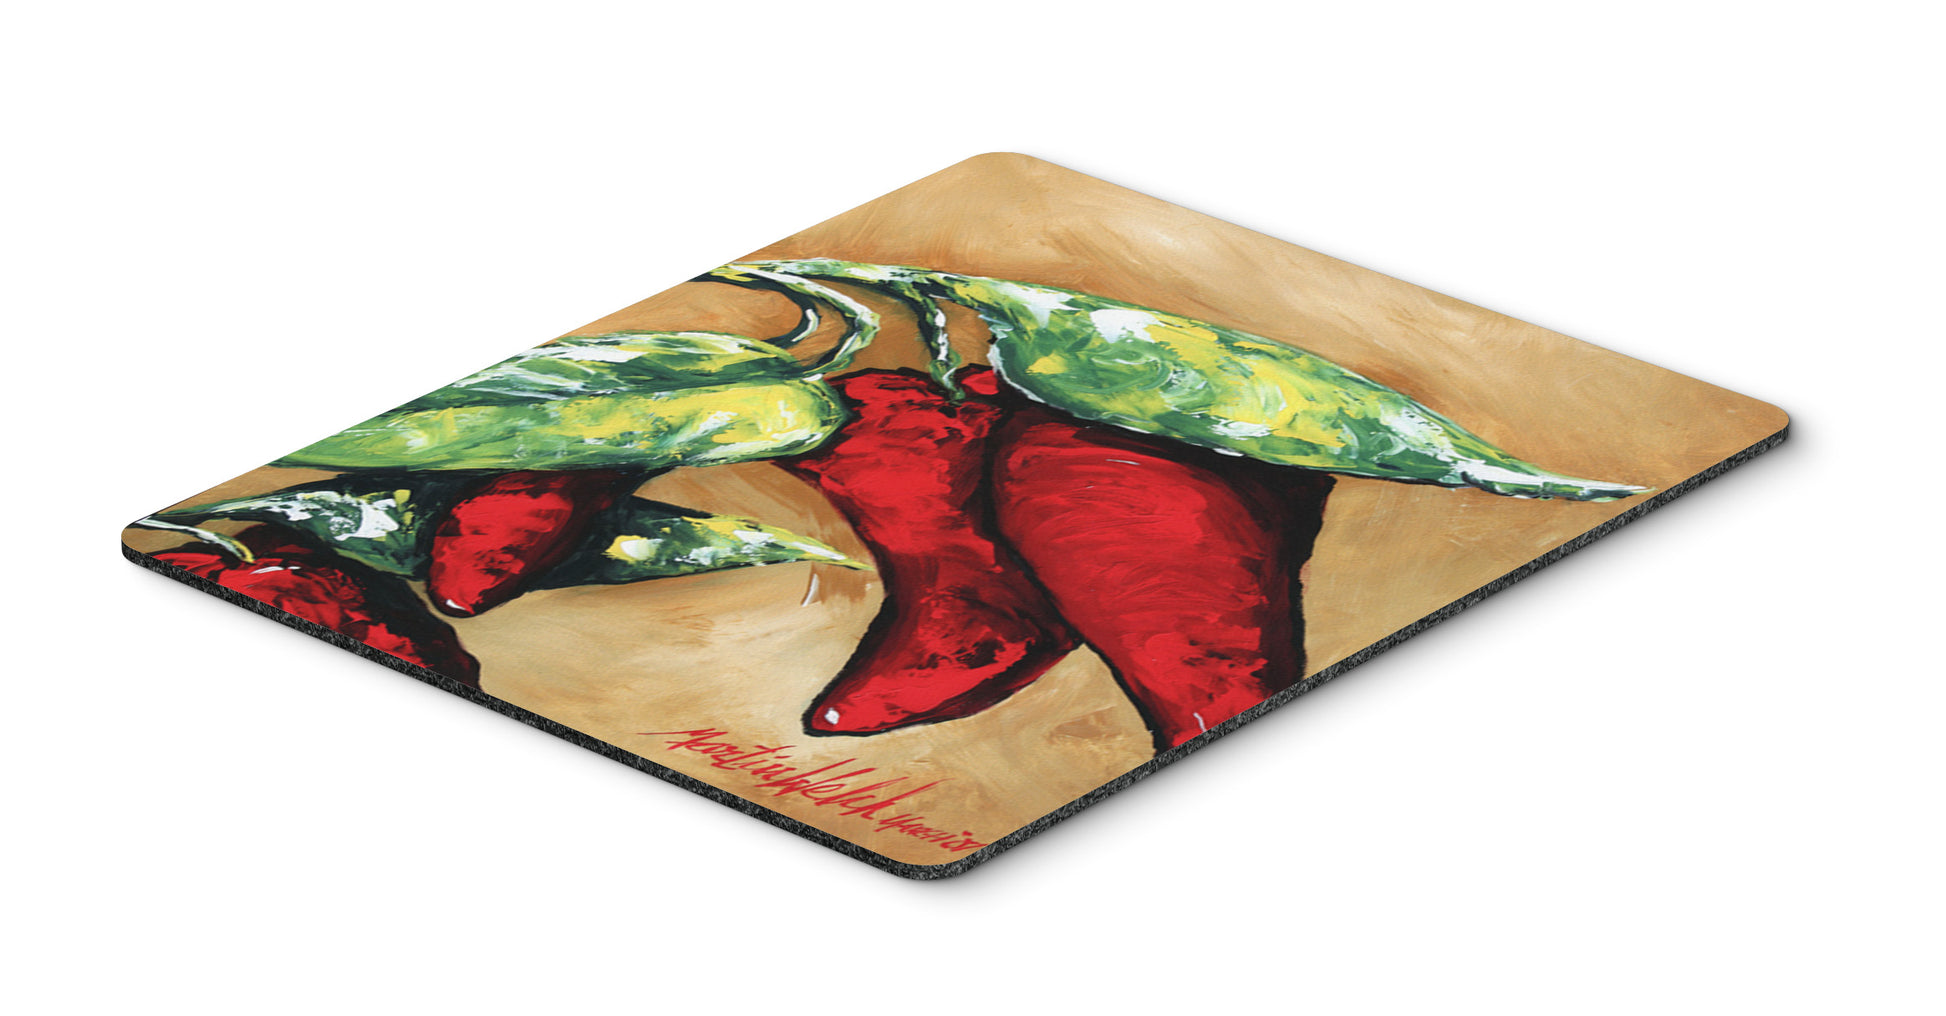 Buy this Hot Peppers Mouse Pad, Hot Pad or Trivet